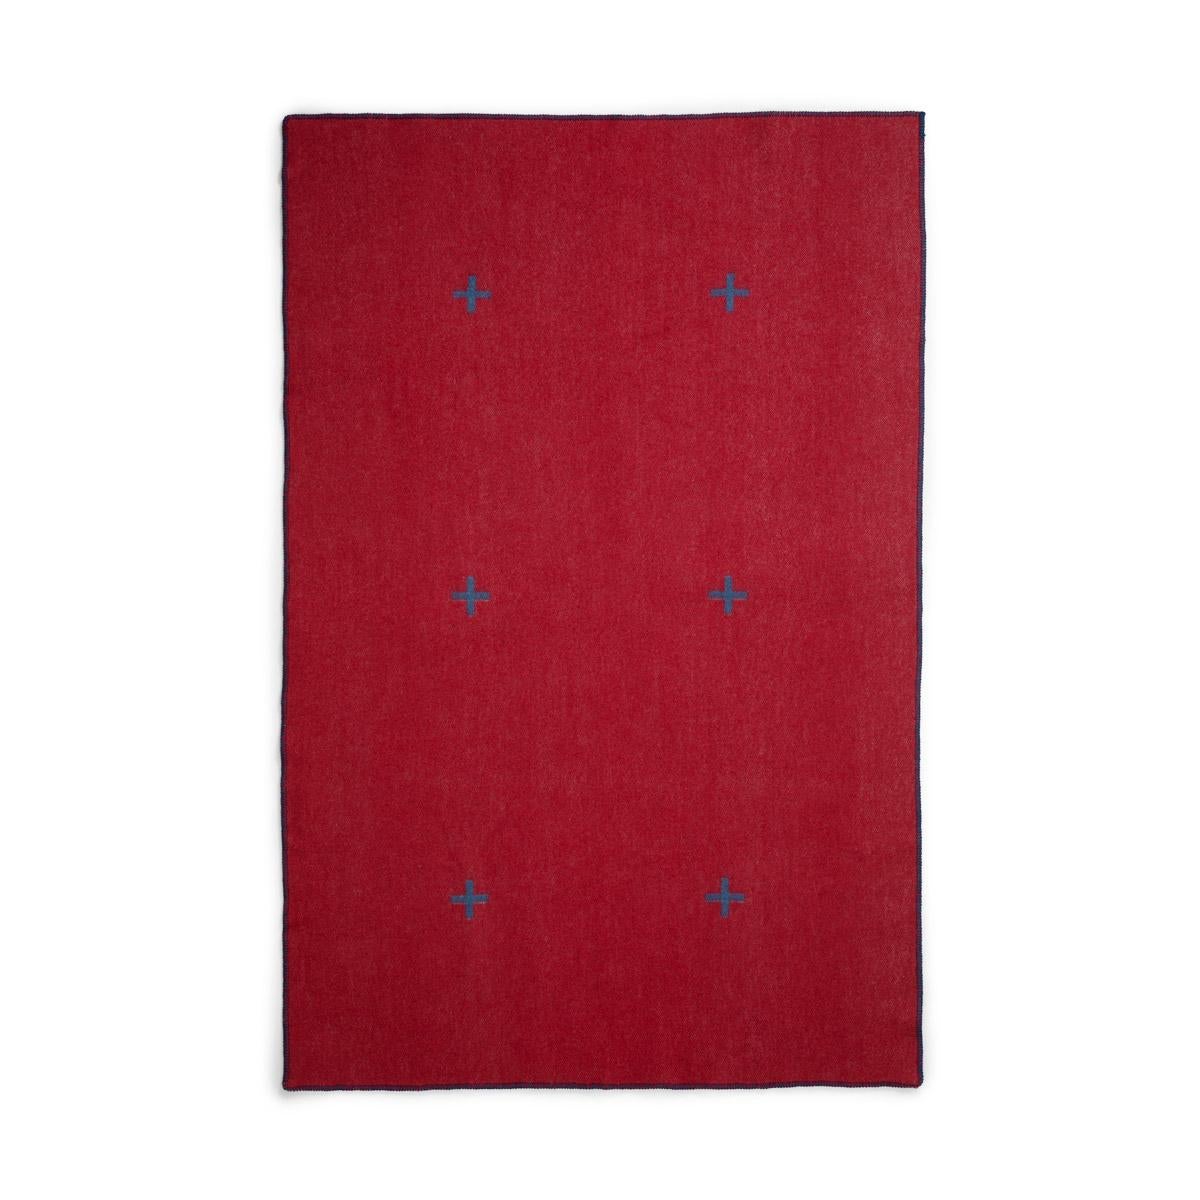 Our plus design is strikingly simple. A Minimalist Scandinavian design in classic blue and red colors. The blanket is woven to be as beautiful on the back as the front but with inverted colors on each side.